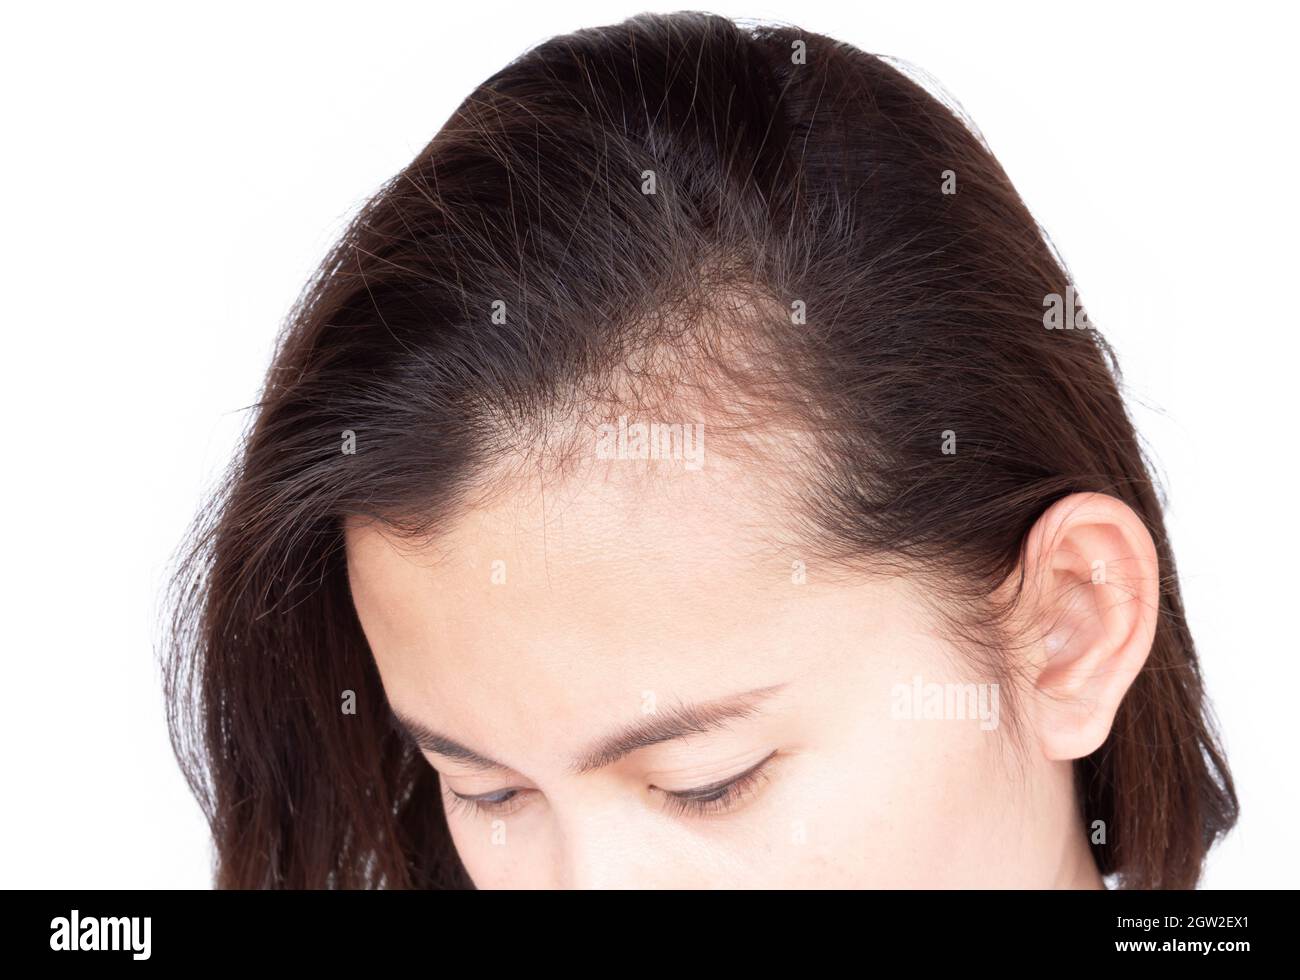 Close-up Of Woman With Receding Hairline Against White Background Stock Photo